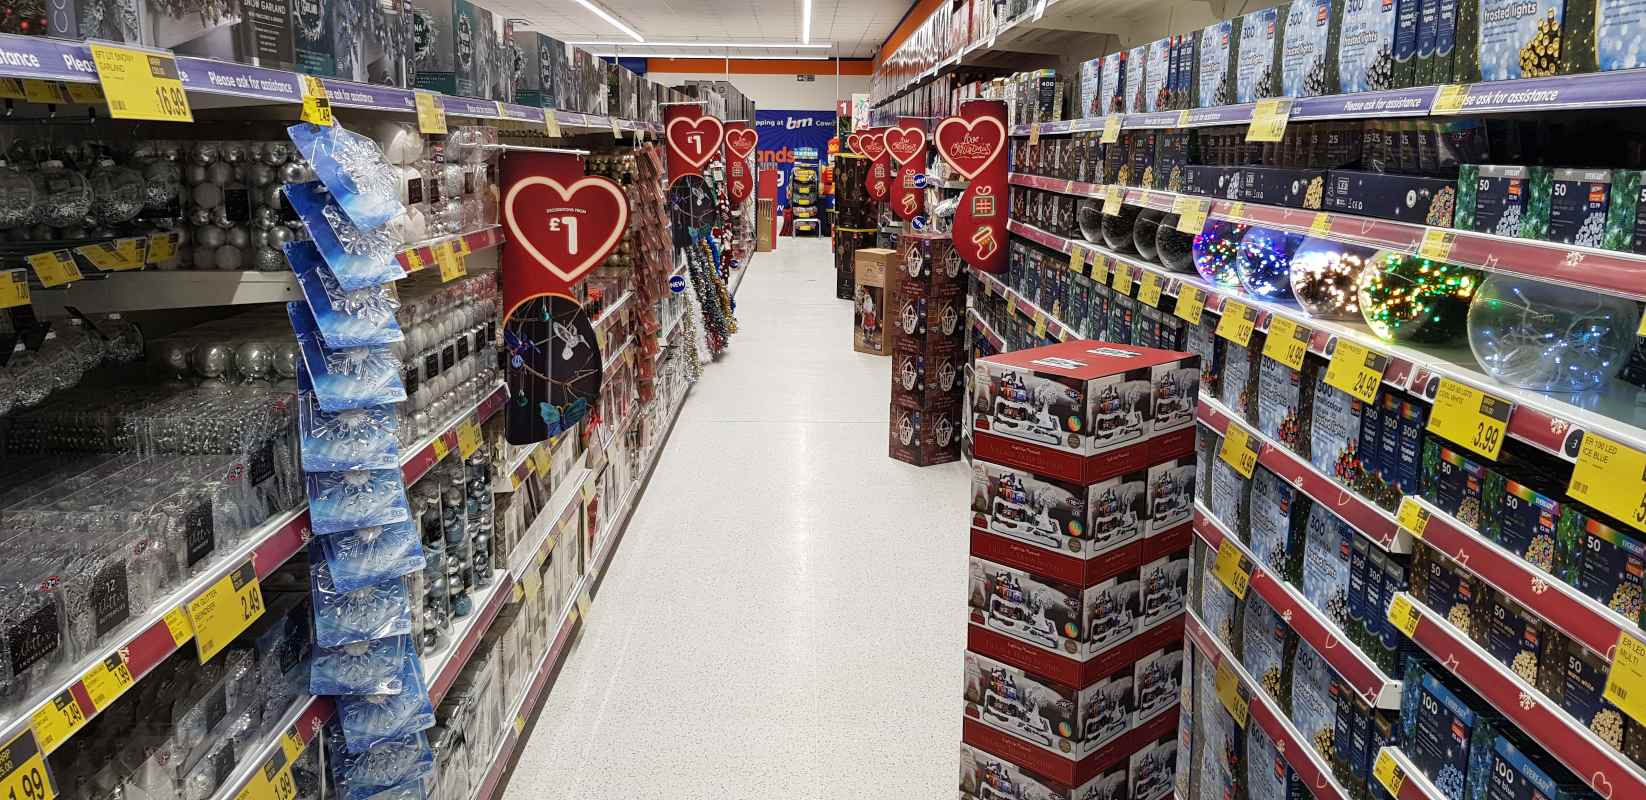 B&M's brand new store in Cowdenbeath stocks a beautiful Christmas, everything from decorations, lights and Christmas trees, to gift bags wrapping paper, selection boxes and much more!